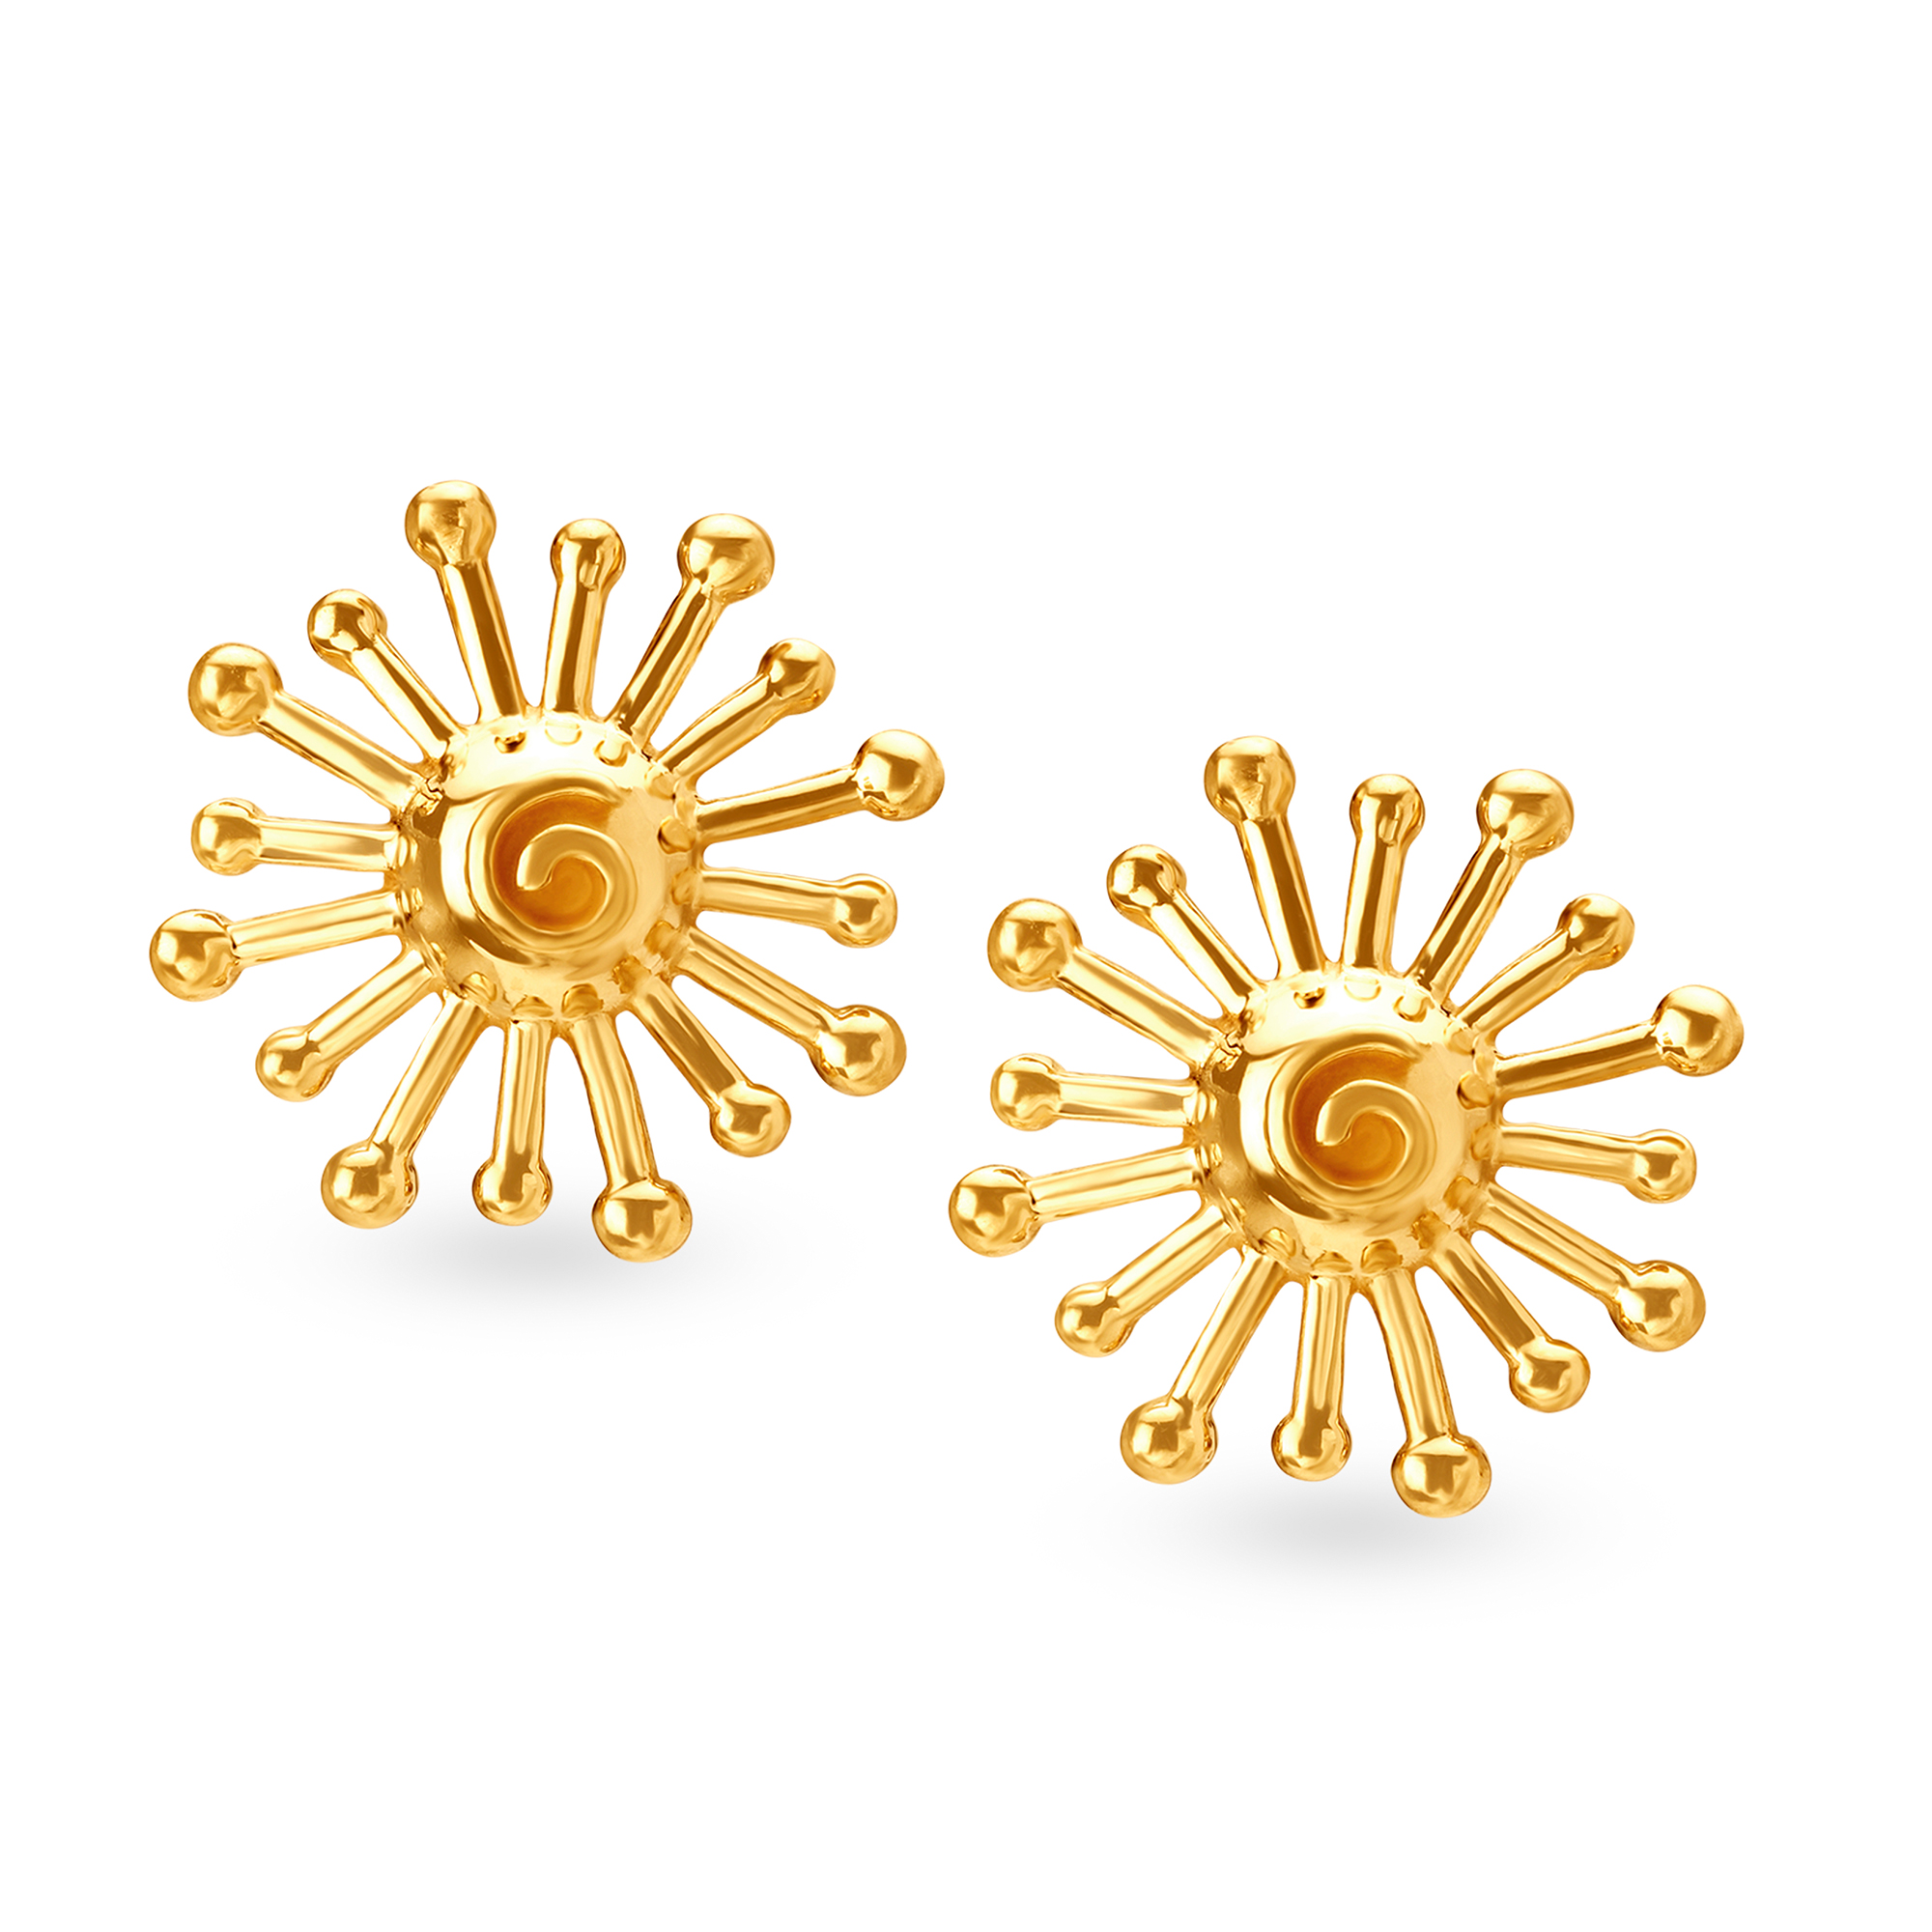 Contemporary Radiant Gold Stud Earrings